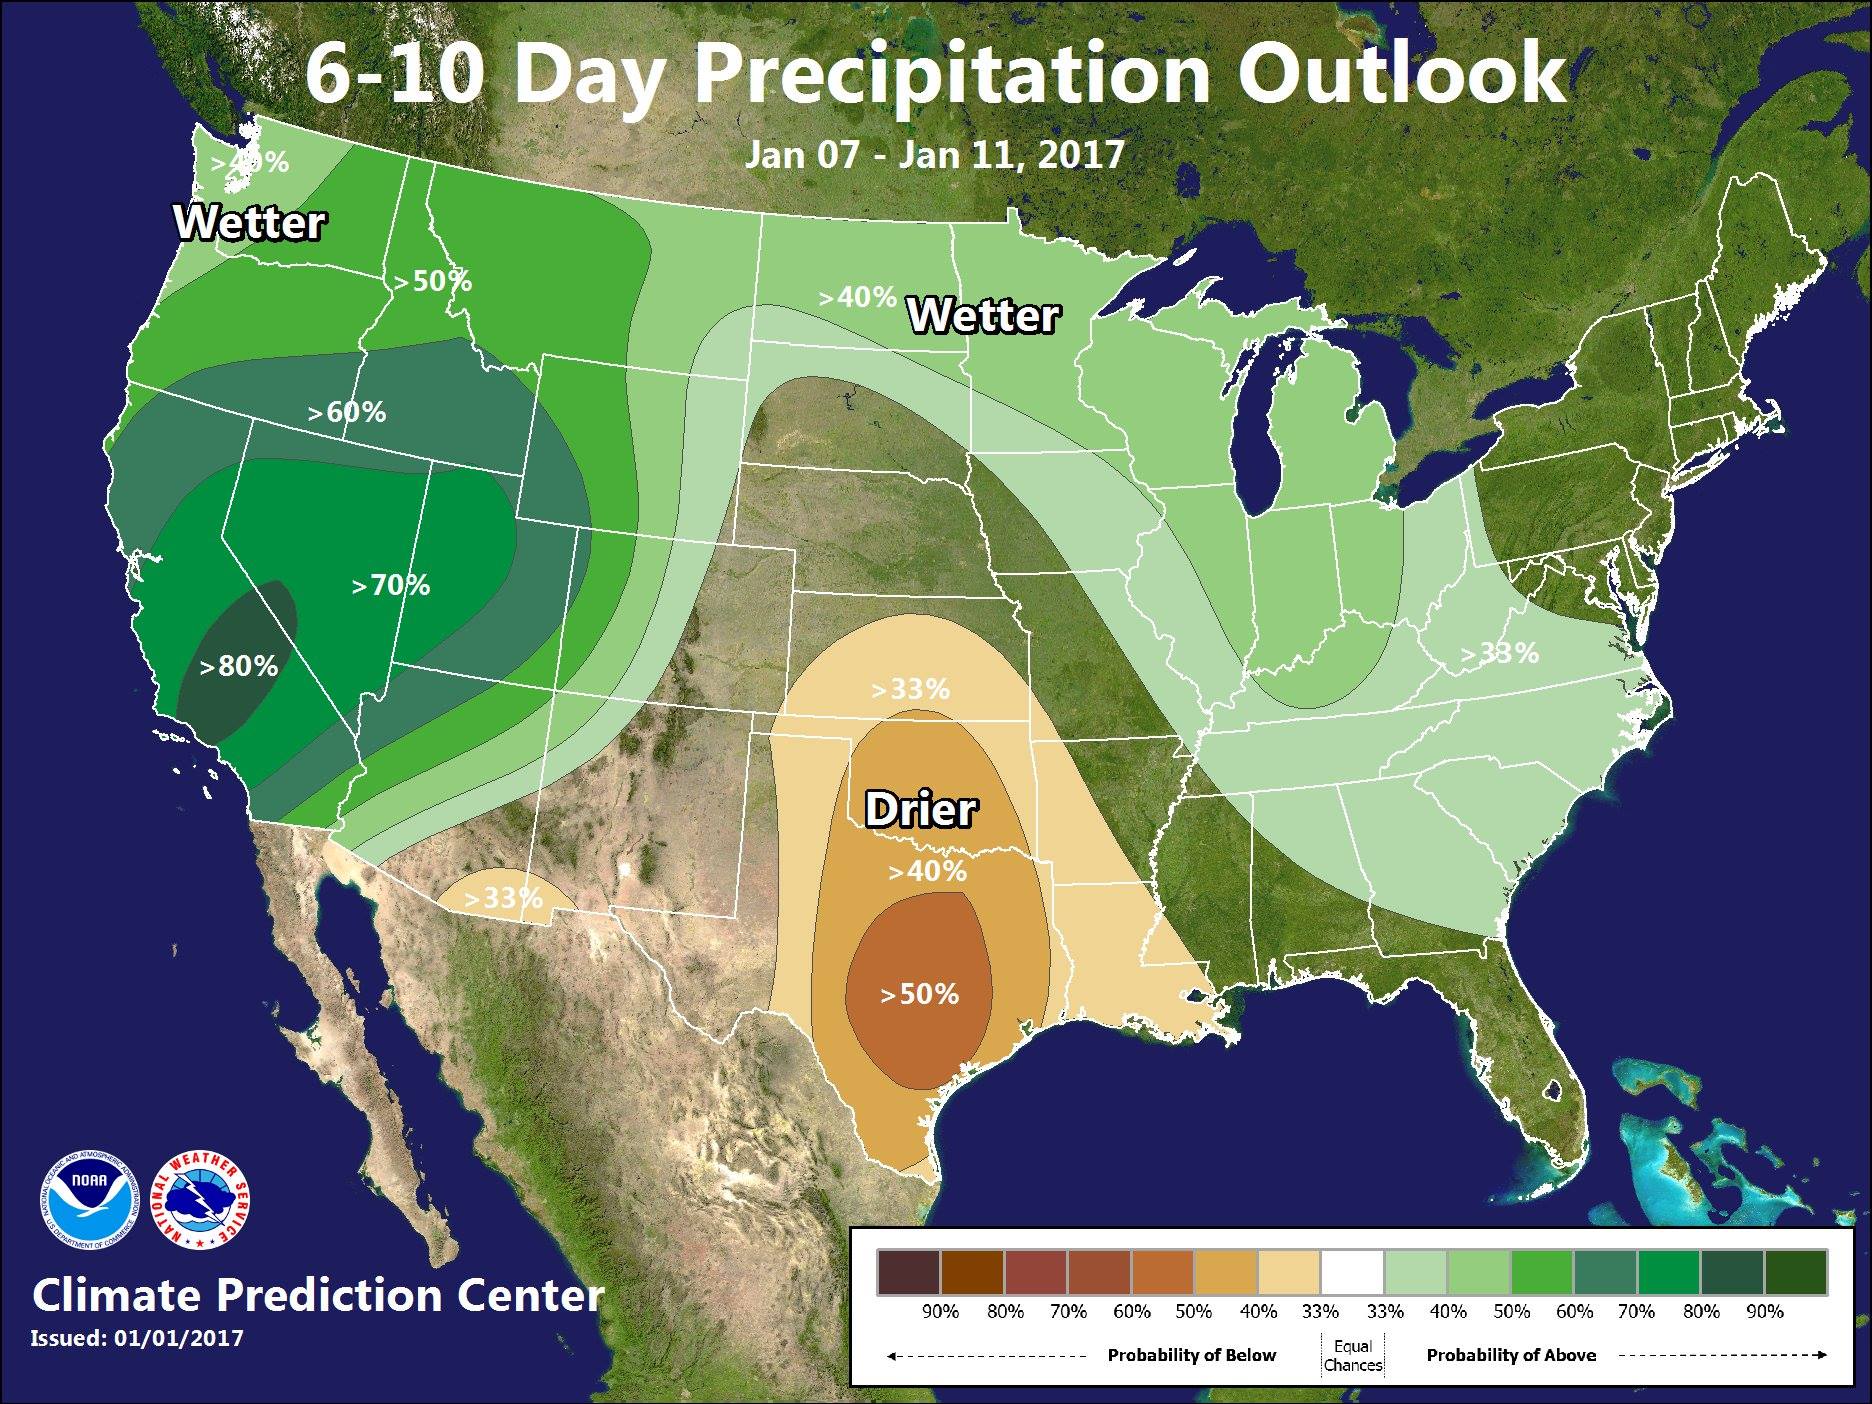 6-10 day outlook looking wet for CO.  image:  NOAA, yesterday